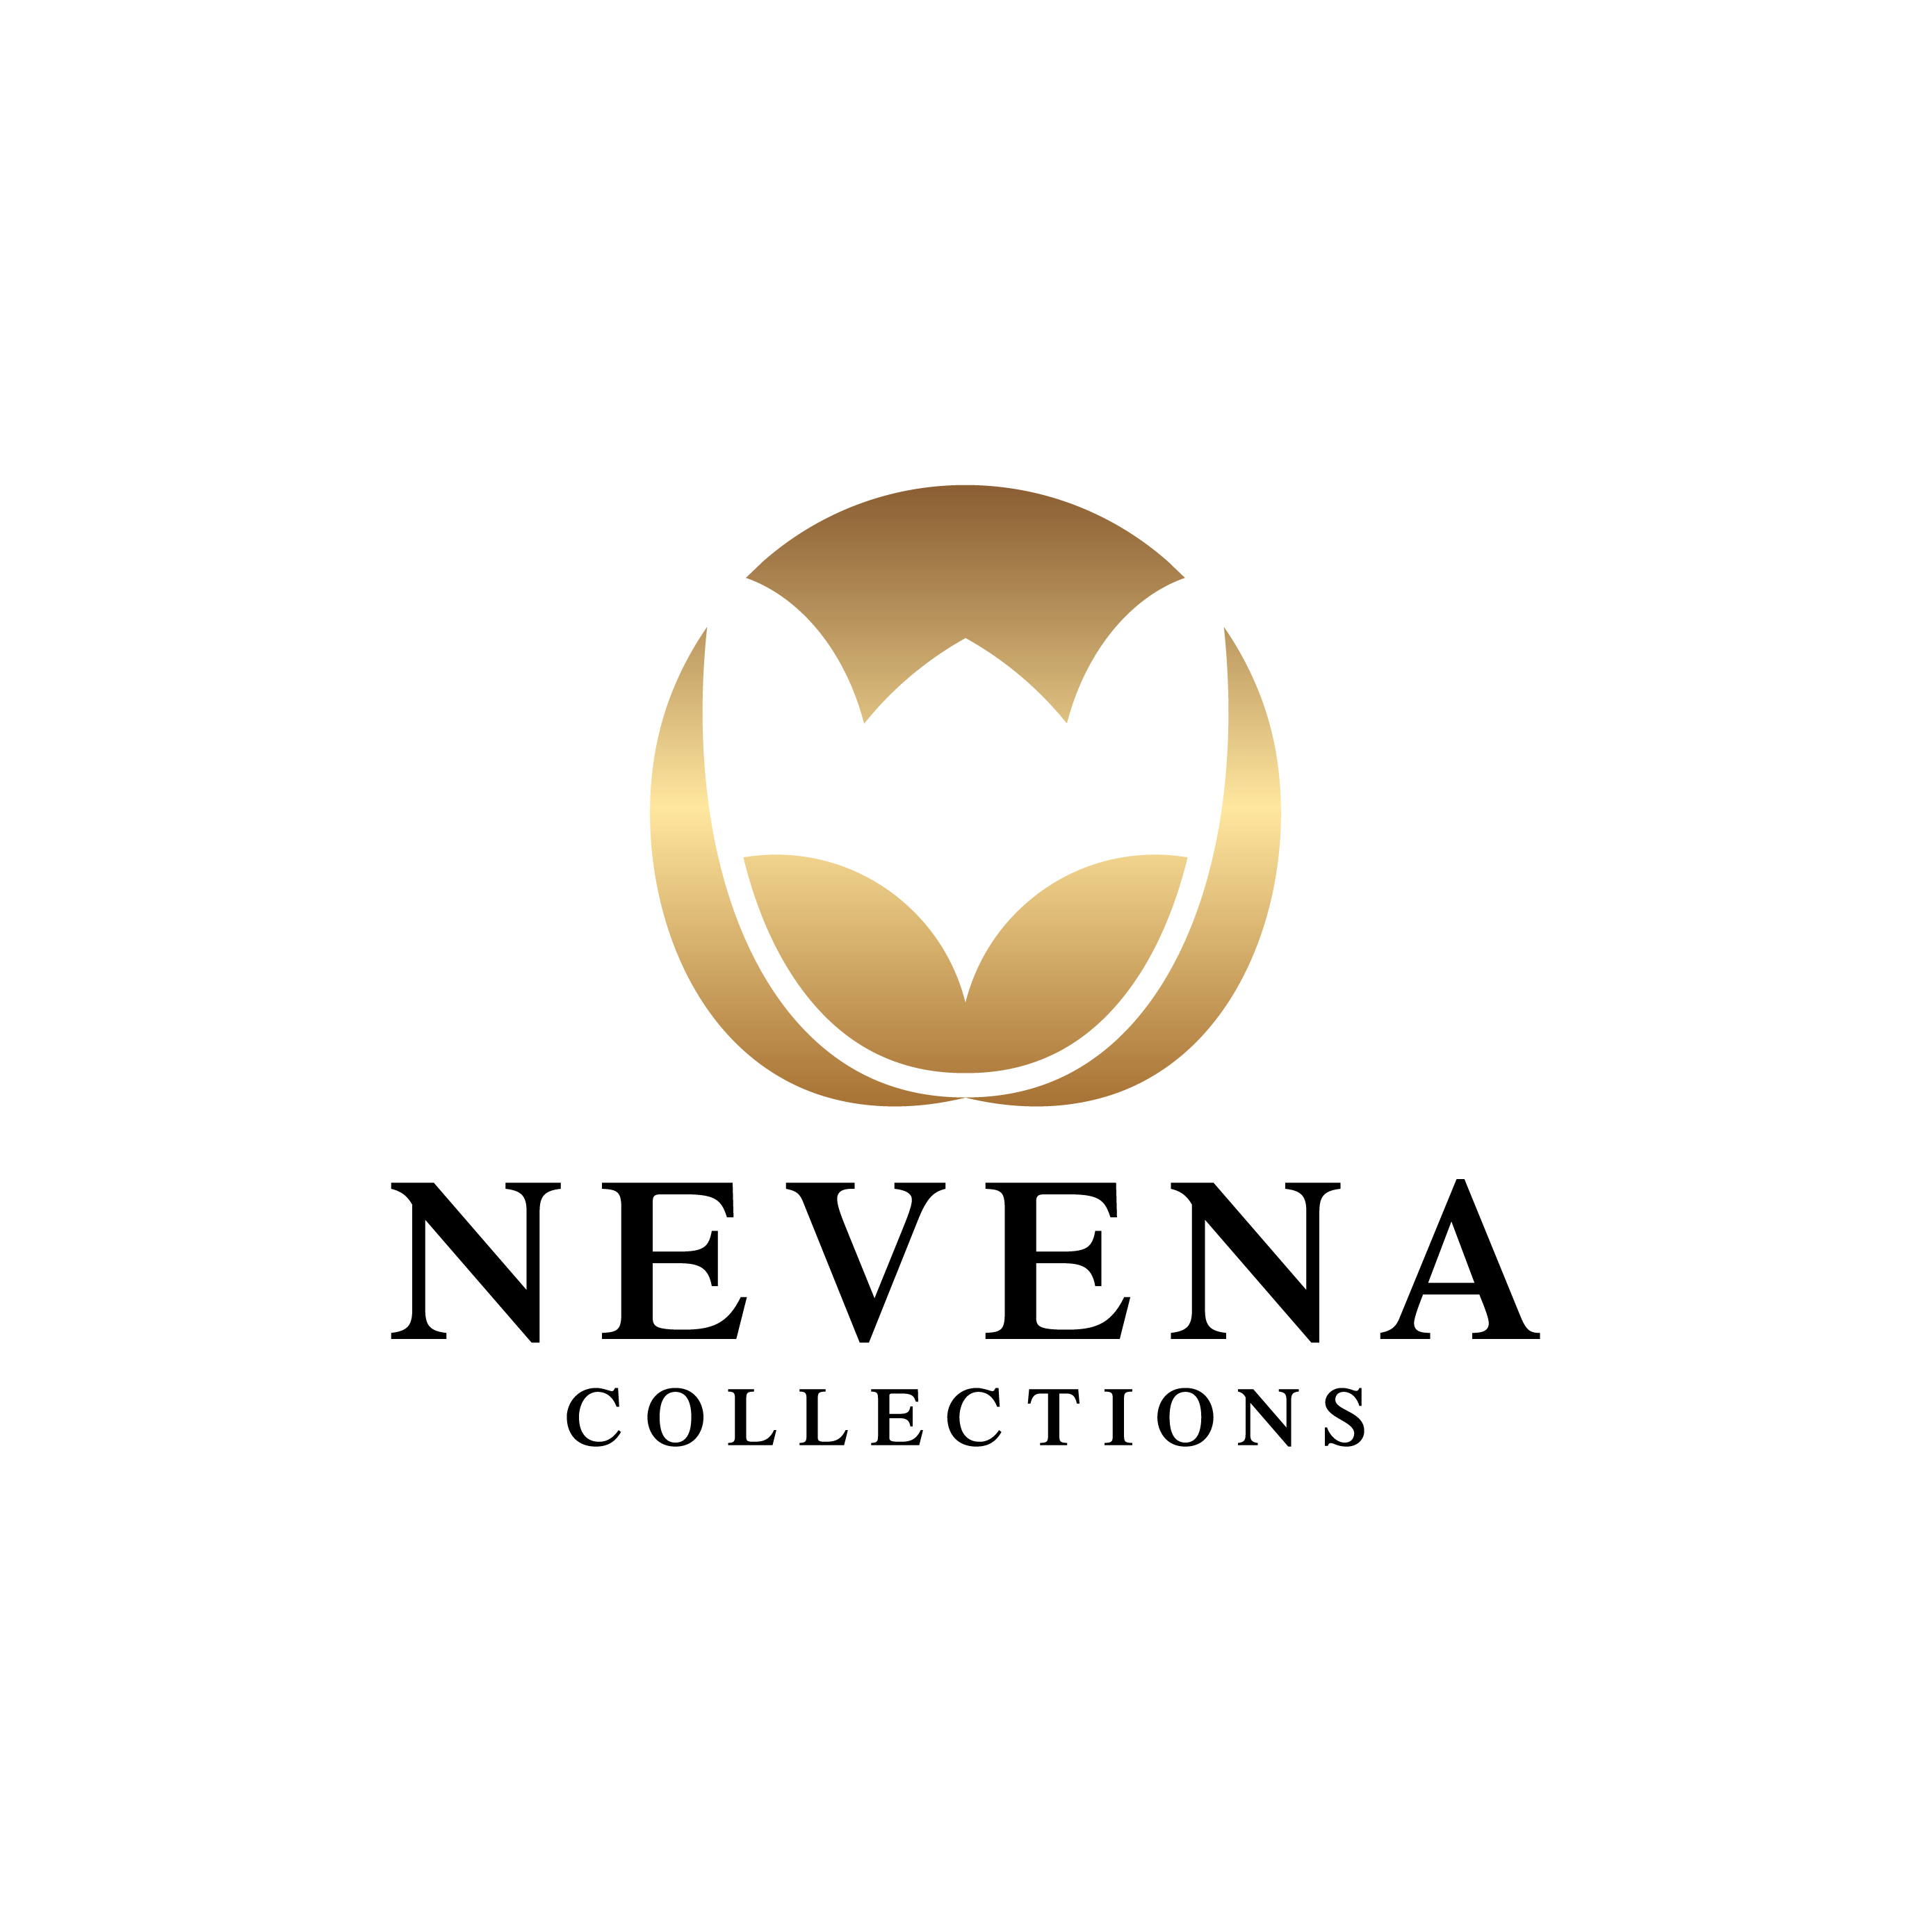 NEVENA Collections